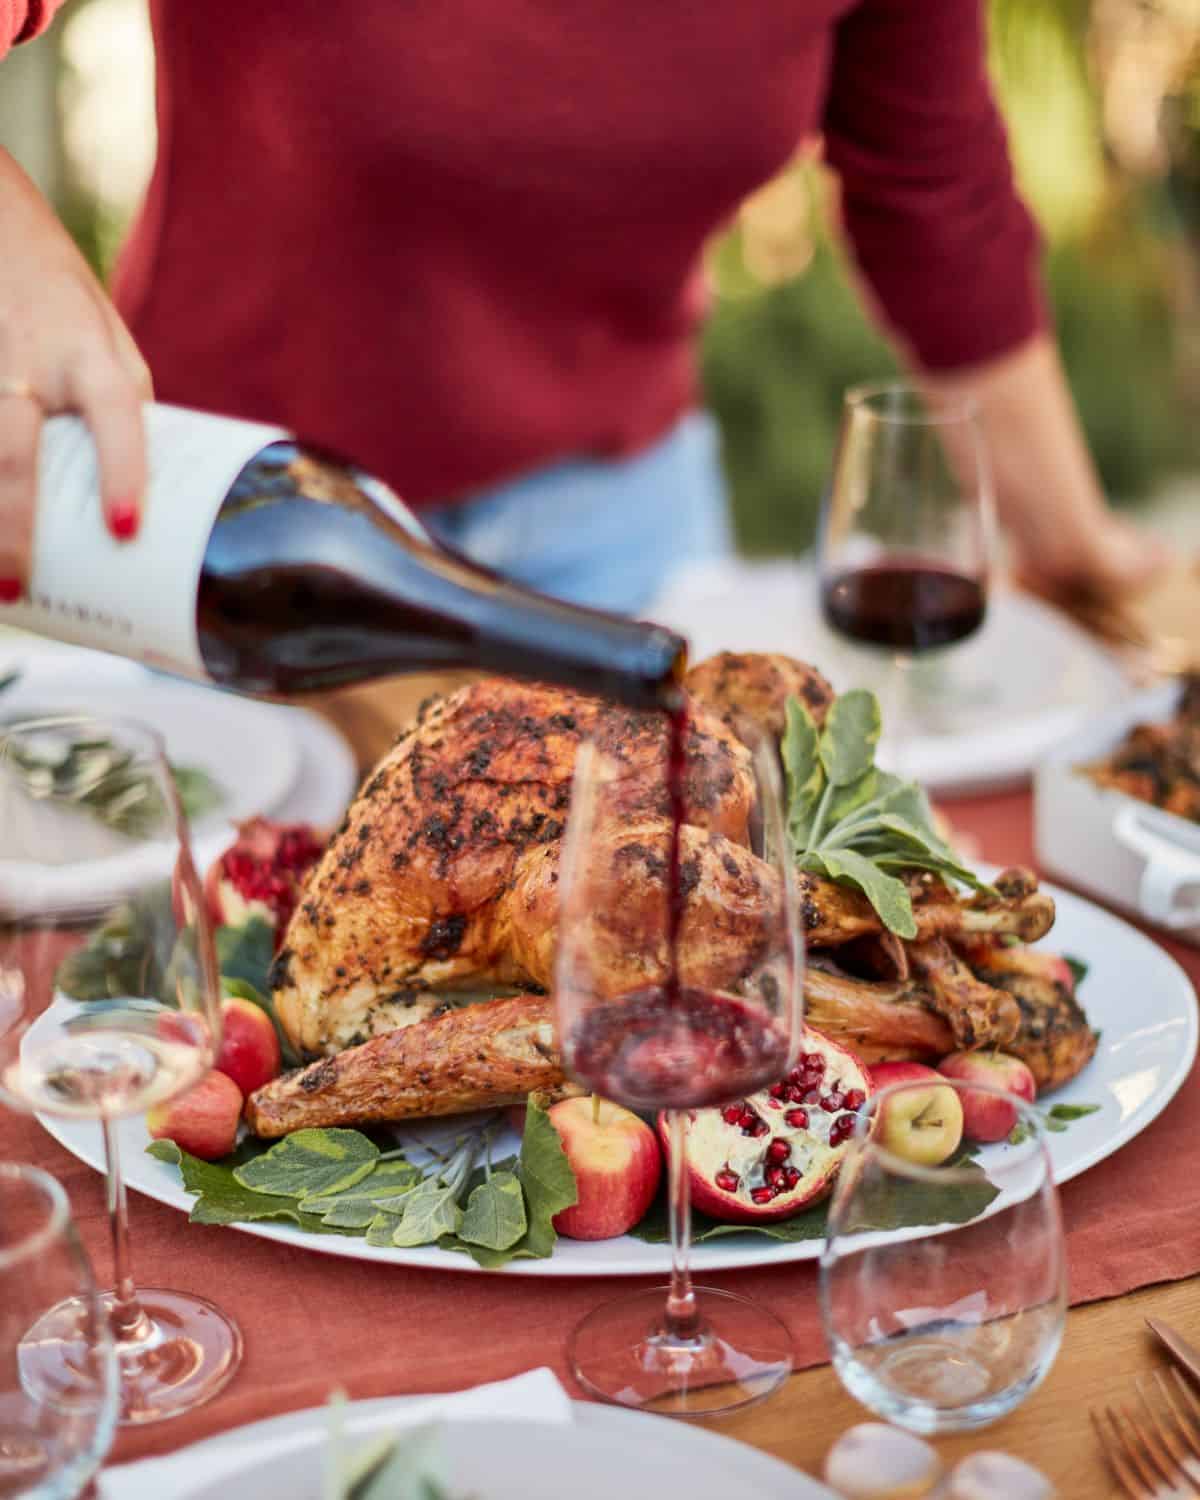 A dinner table with wine glases, plates, and a white plate with whole roasted turkey in it, with a blurry background of a woman pouring red wine into a wine glass.